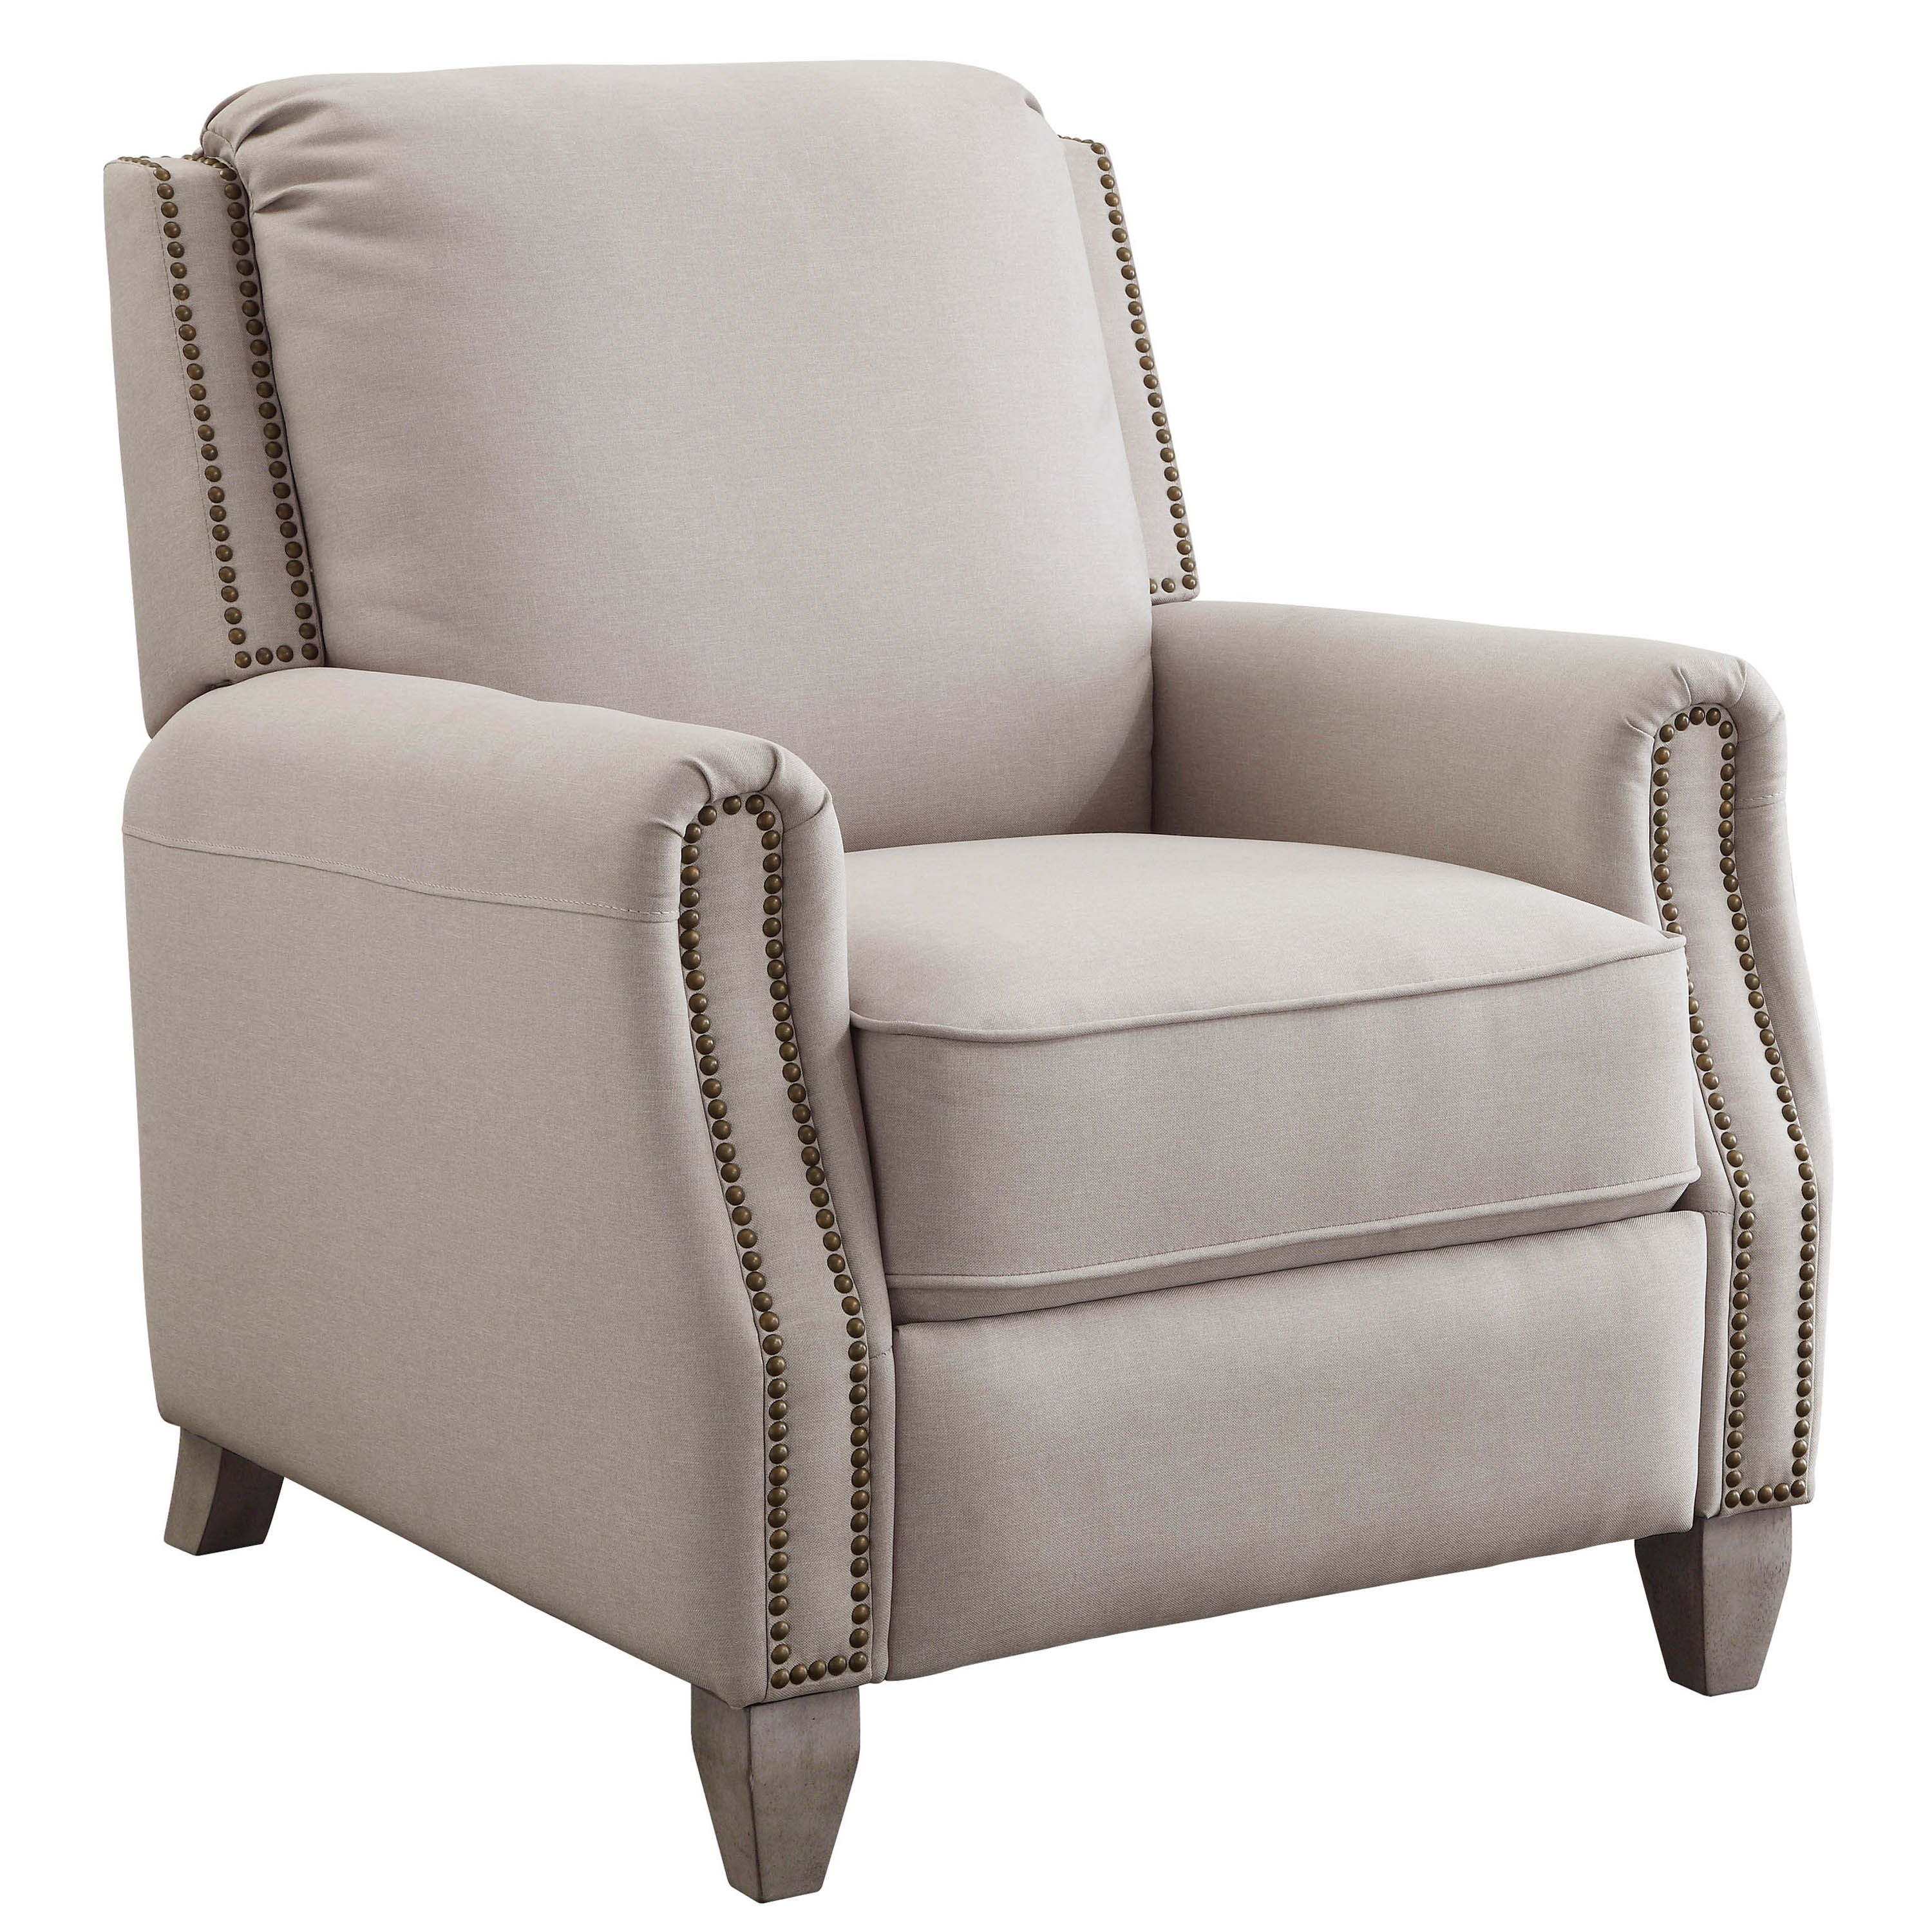 Better Homes and Gardens Pushback Recliner, Taupe Fabric Upholstery - image 1 of 7